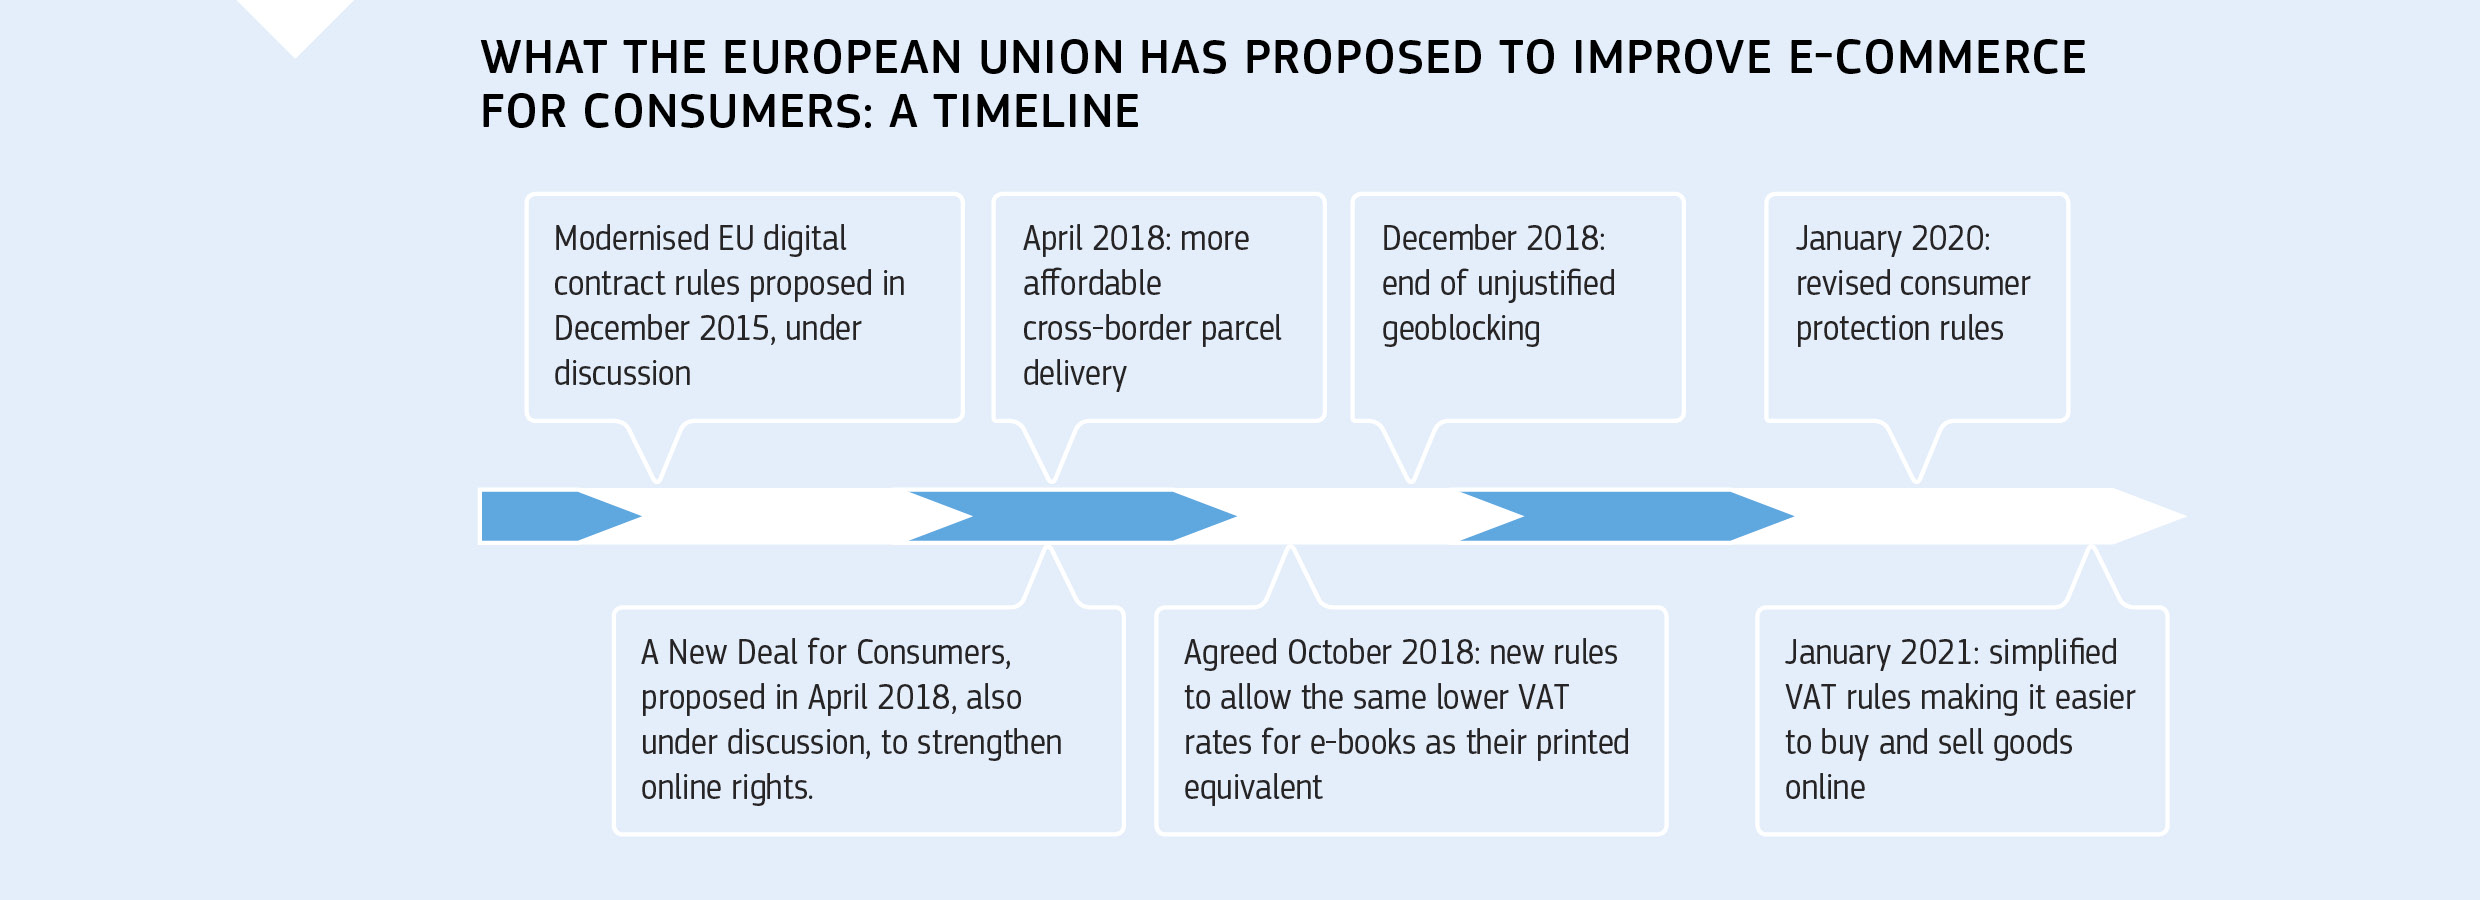 WHAT THE EUROPEAN UNION HAS PROPOSED TO IMPROVE E-COMMERCE FOR CONSUMERS: A TIMELINE